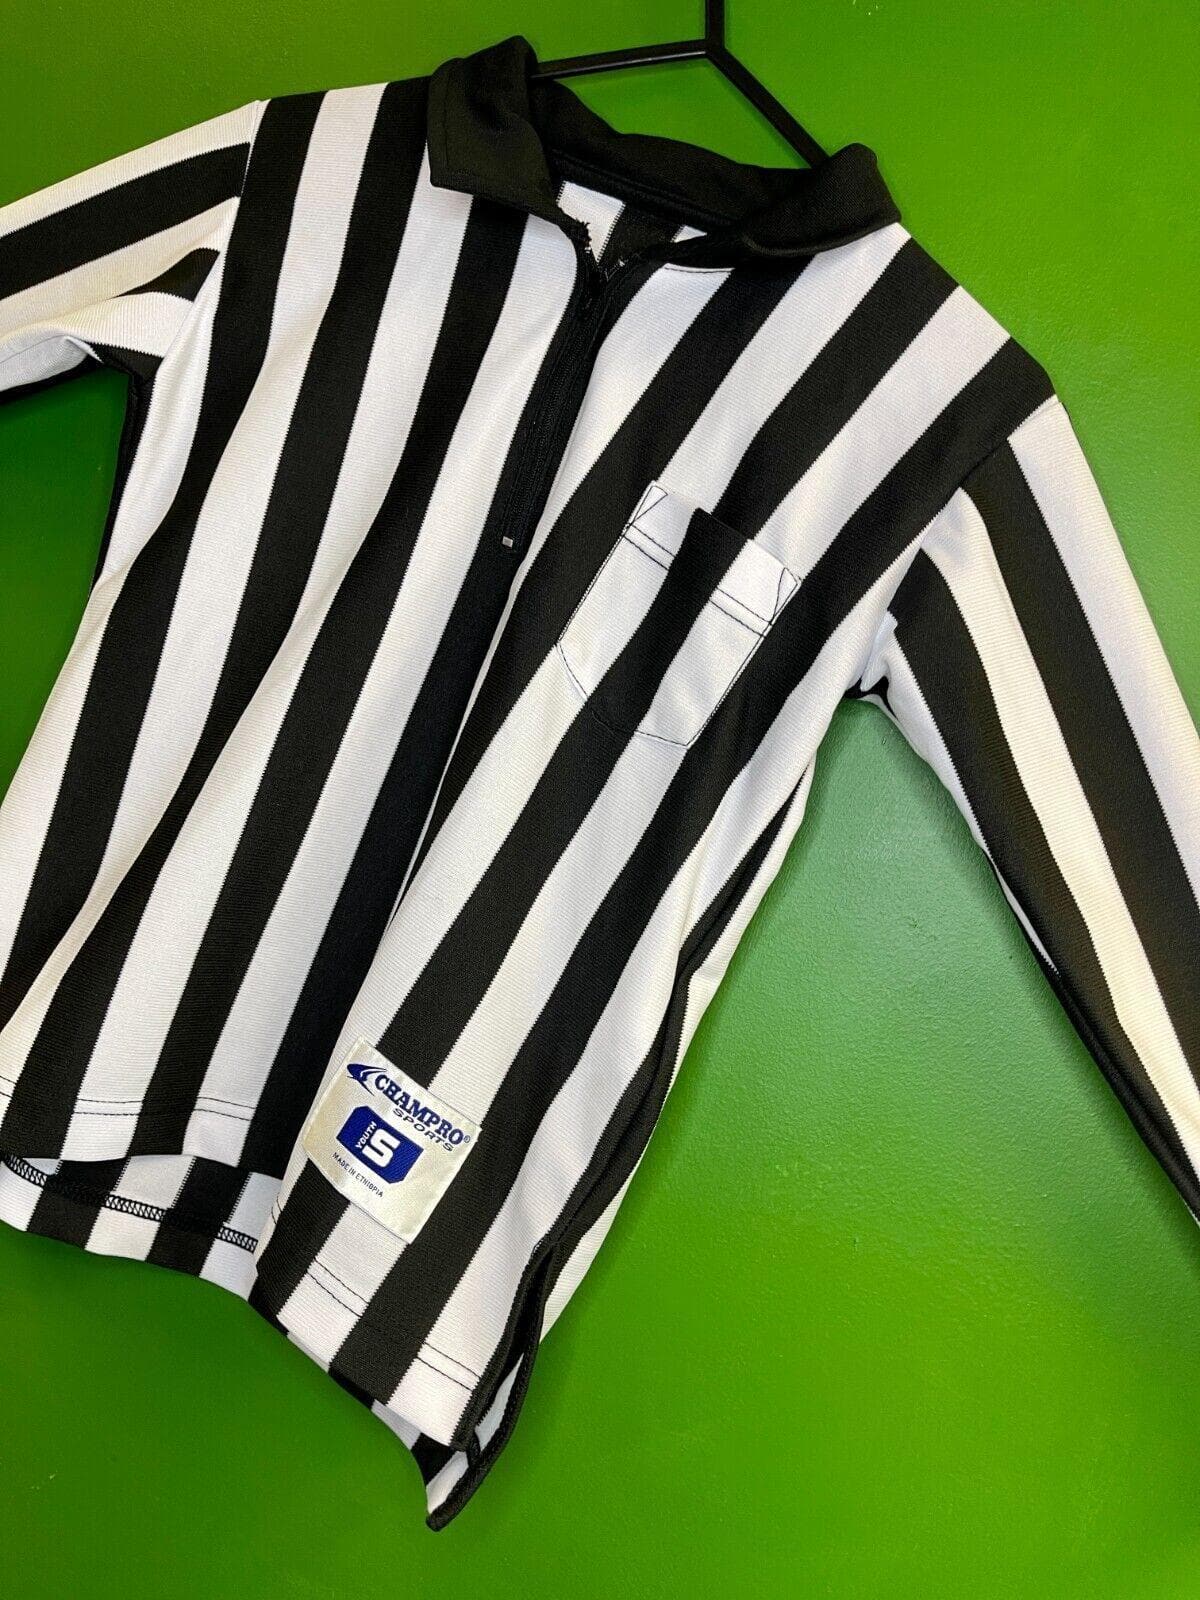 American Football Striped Referee Jersey Long Sleeved Youth Small 6-8 (30")